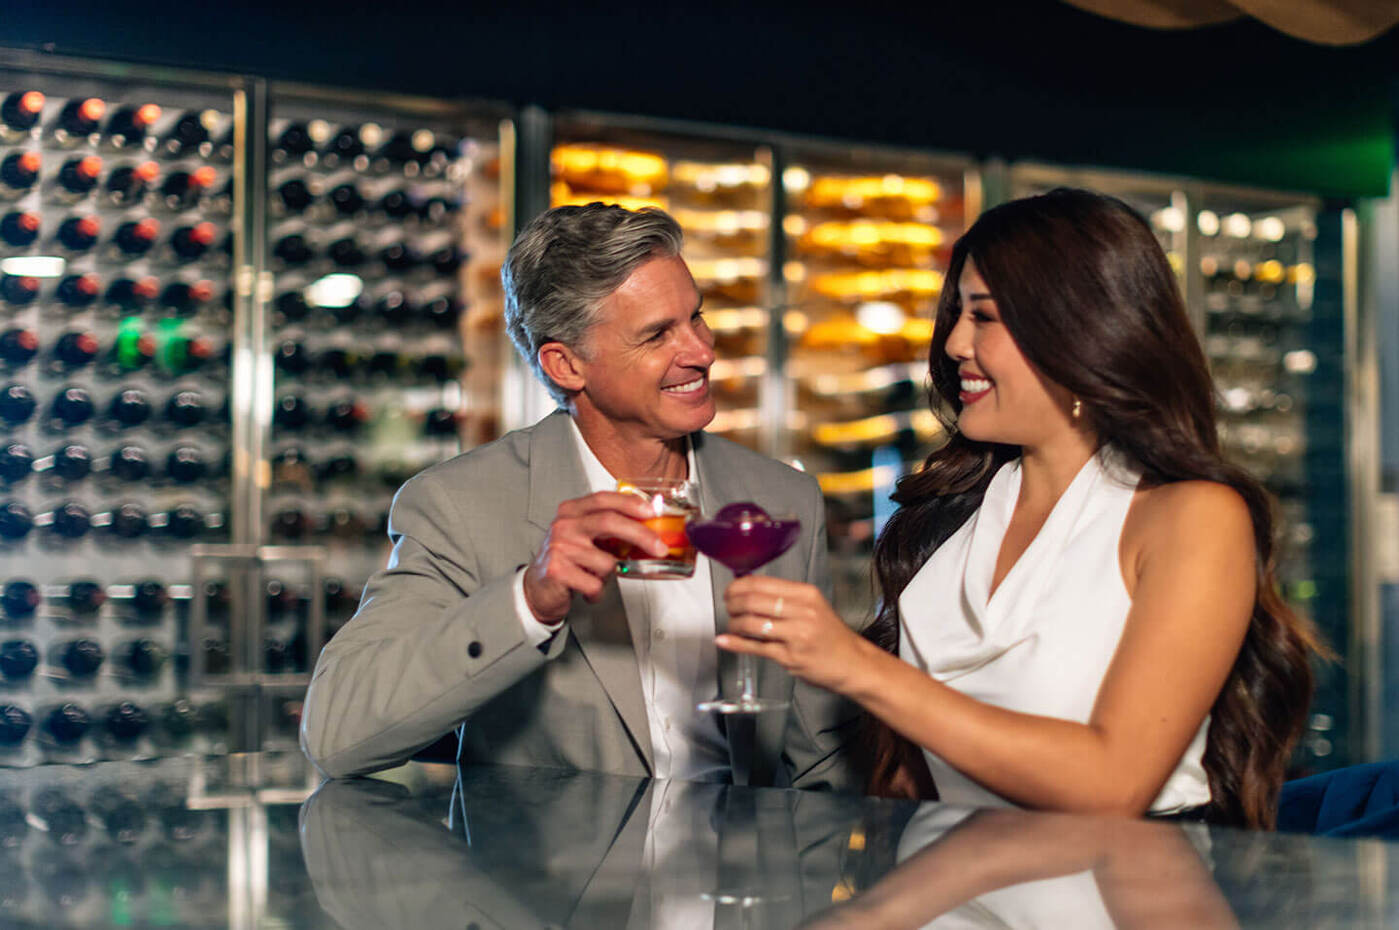 Couple enjoying drinks at bar with wine cellar in background